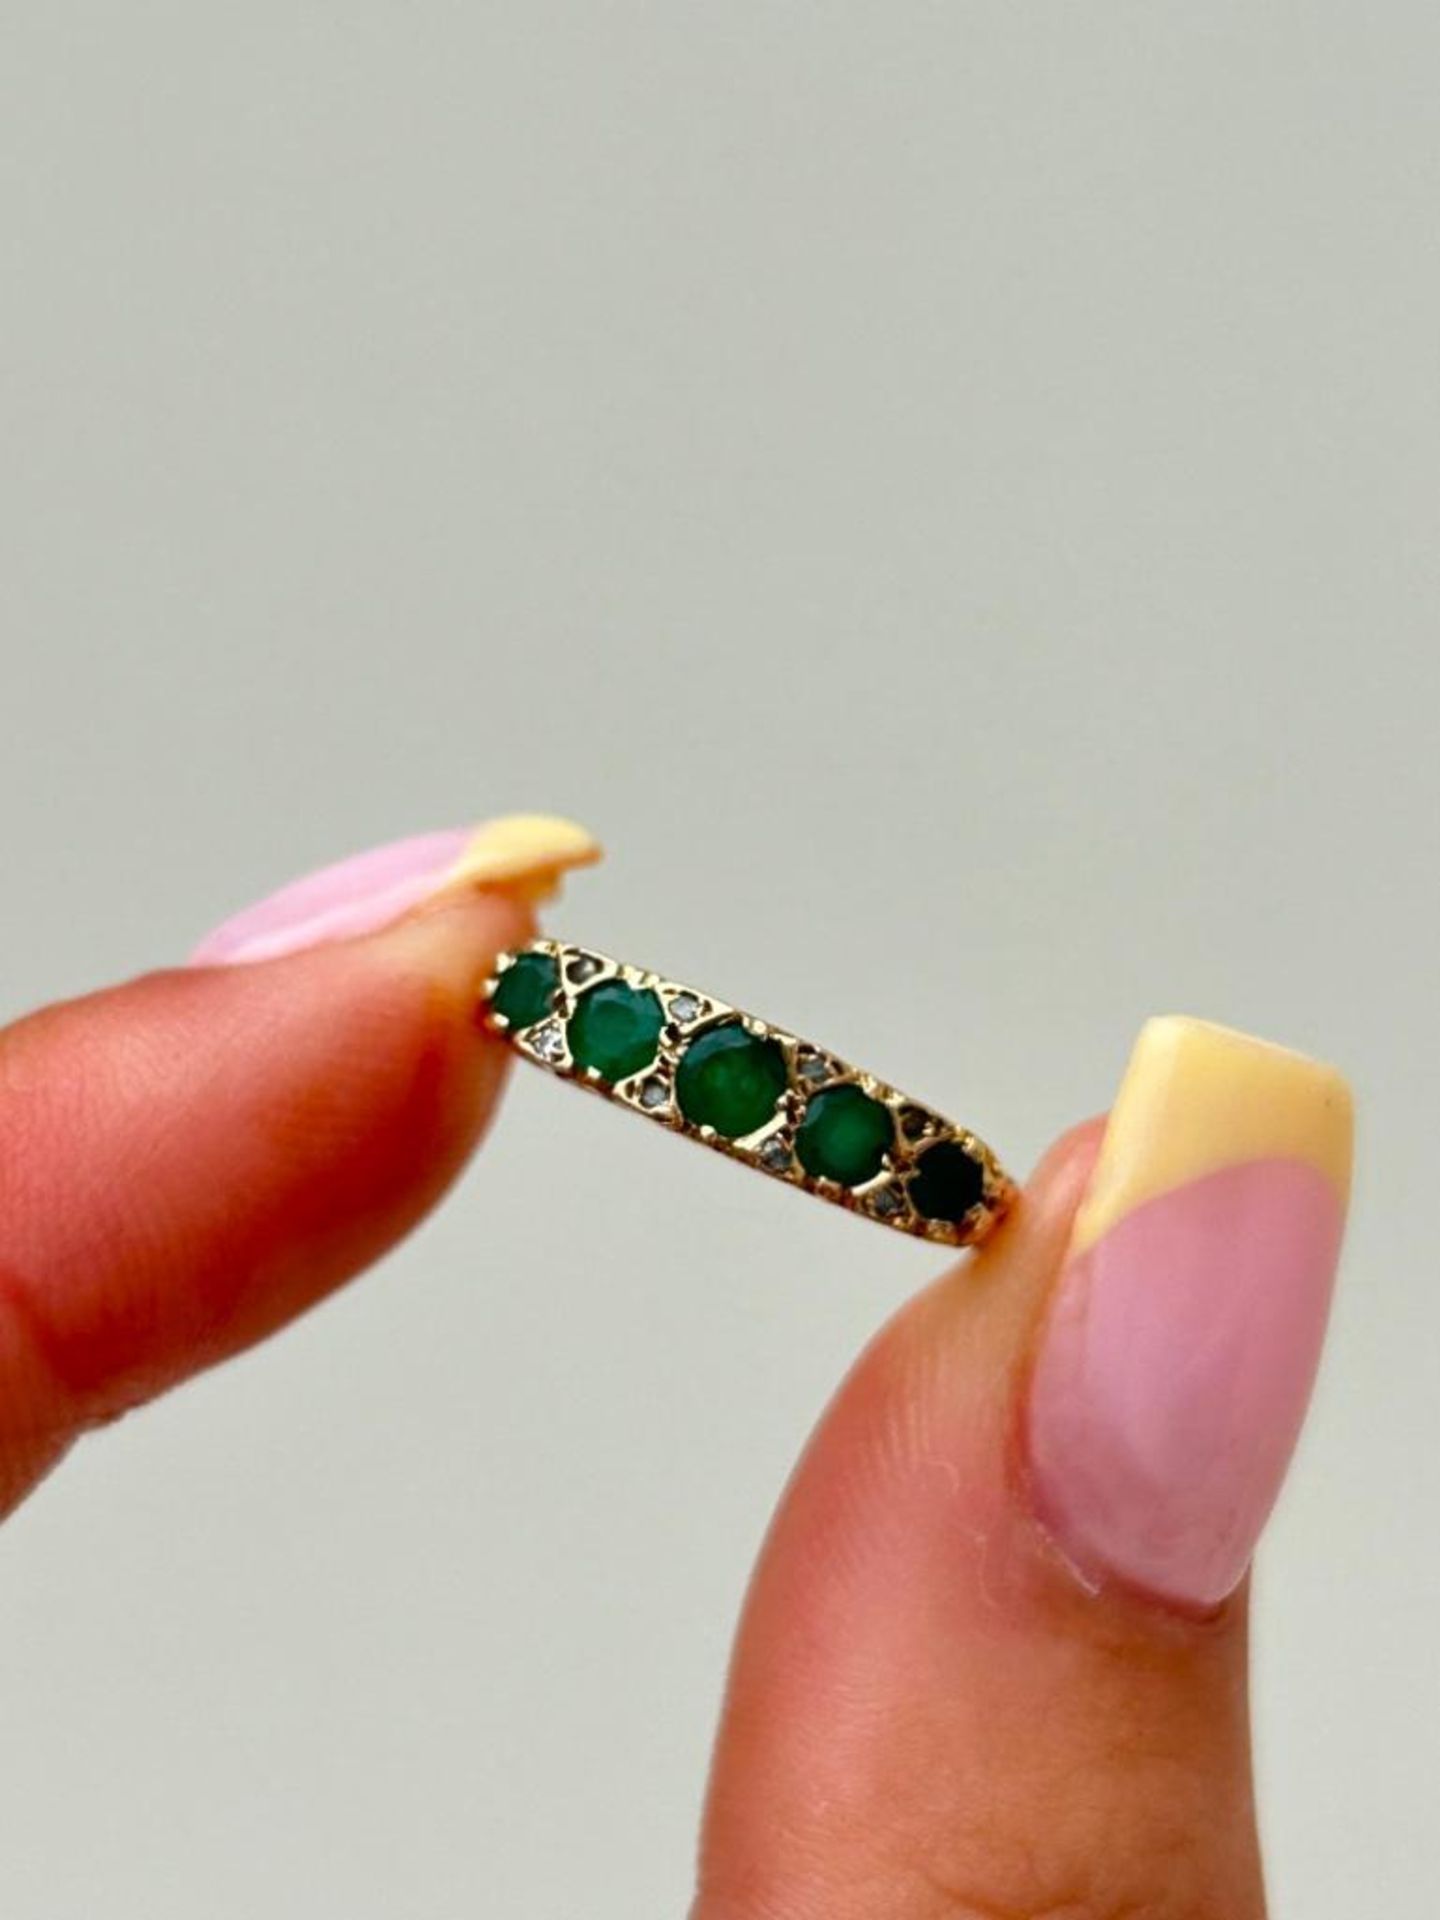 18ct Yellow Gold Emerald 5 Stone Ring with Diamond Points - Image 5 of 8